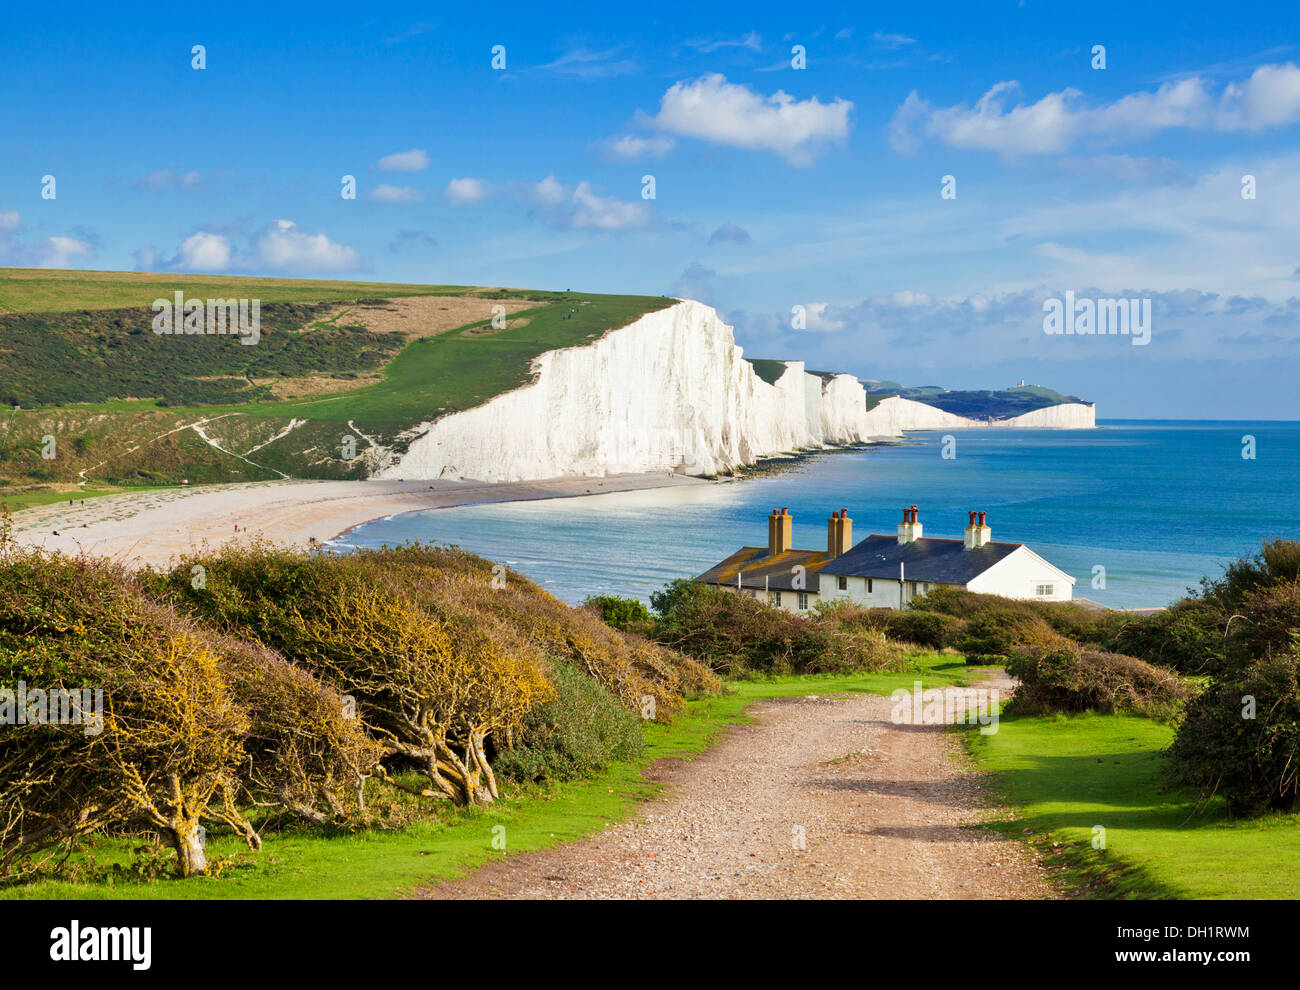 The Seven Sisters Cliffs, The Coastguard Cottages on the South Downs Way, South Downs National Park, East Sussex, England, Großbritannien, GB, Europa Stockfoto